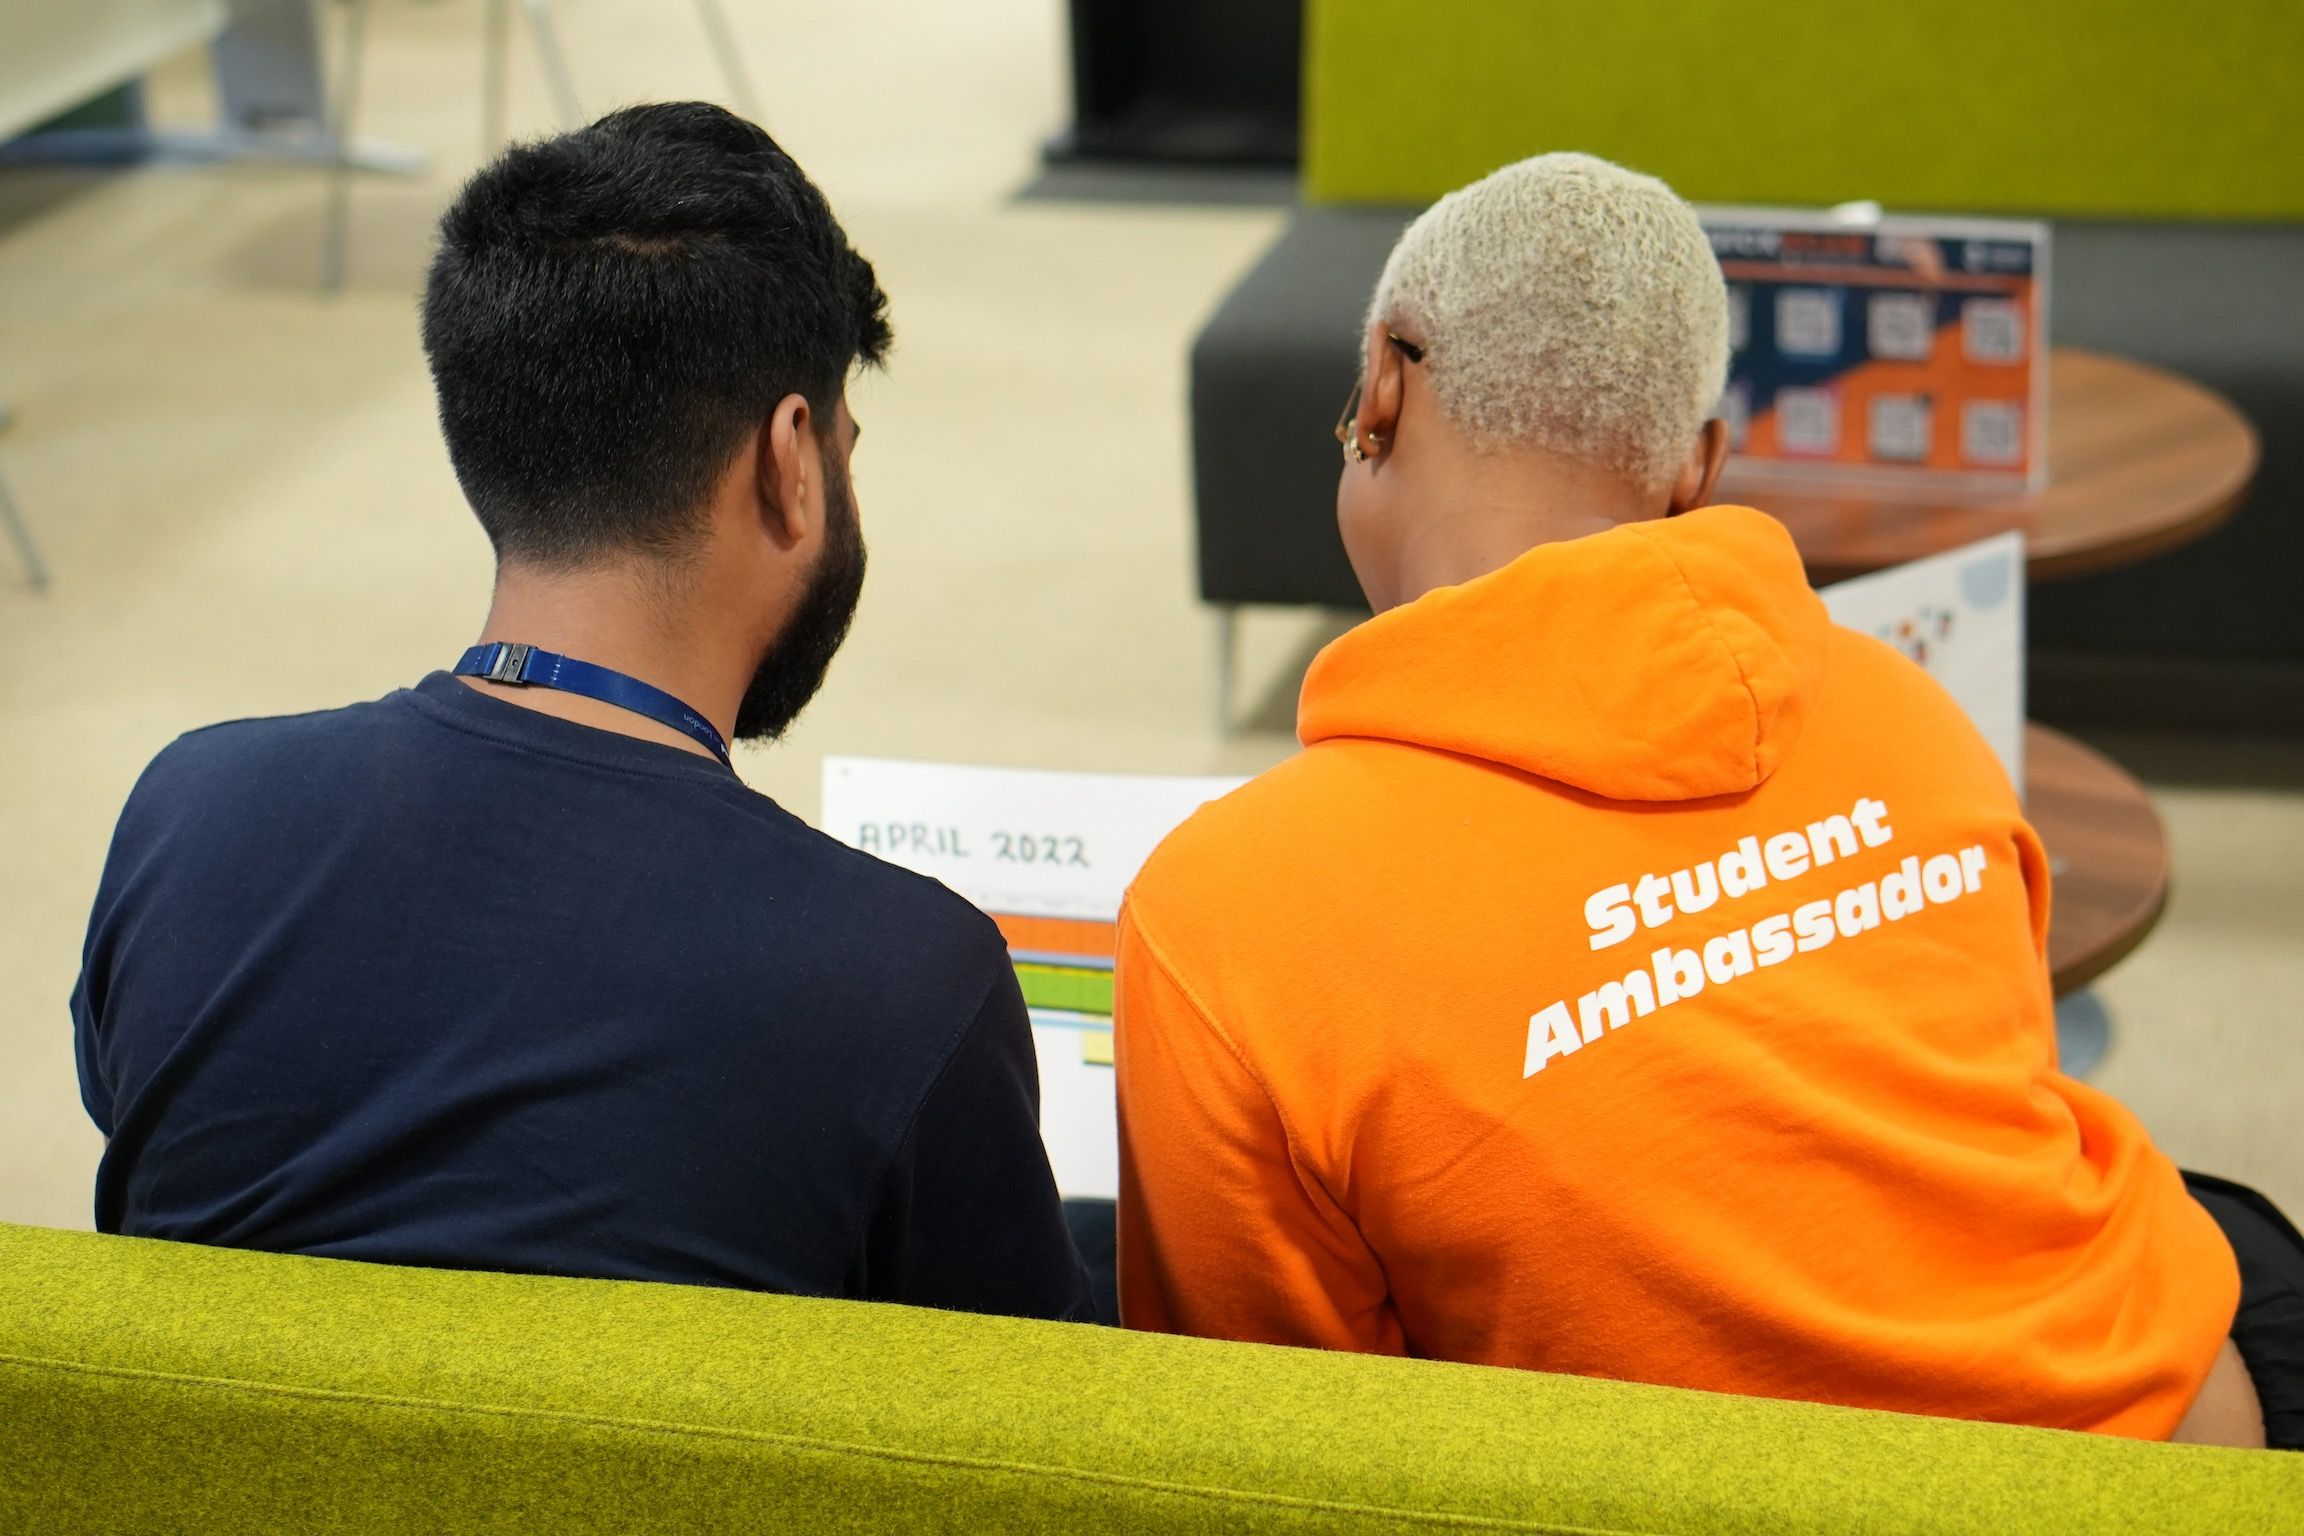 A student ambassador helps a student with their timetable